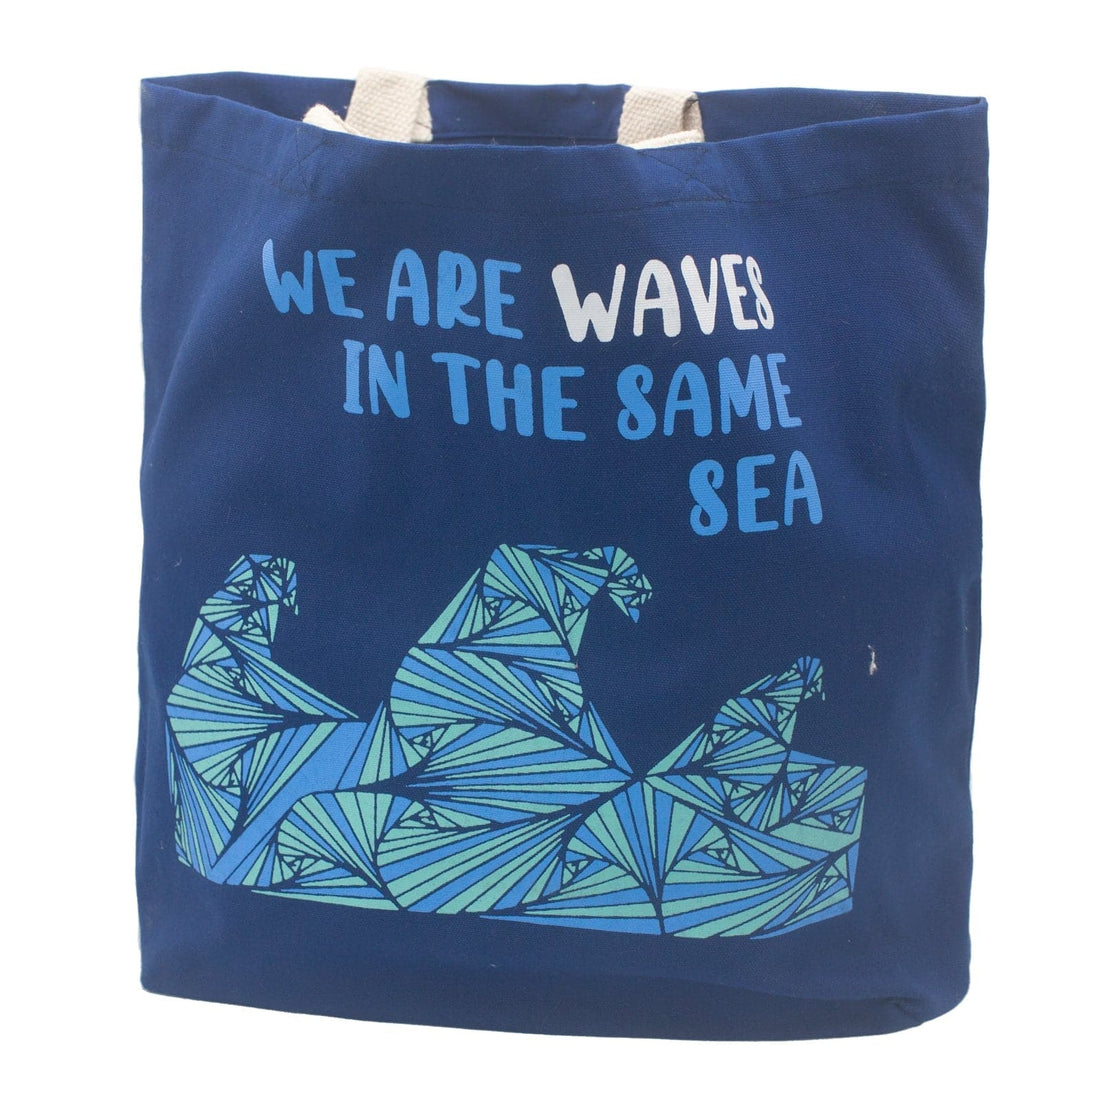 Printed Cotton Bag - We are Waves - Blue - best price from Maltashopper.com PCB-01B